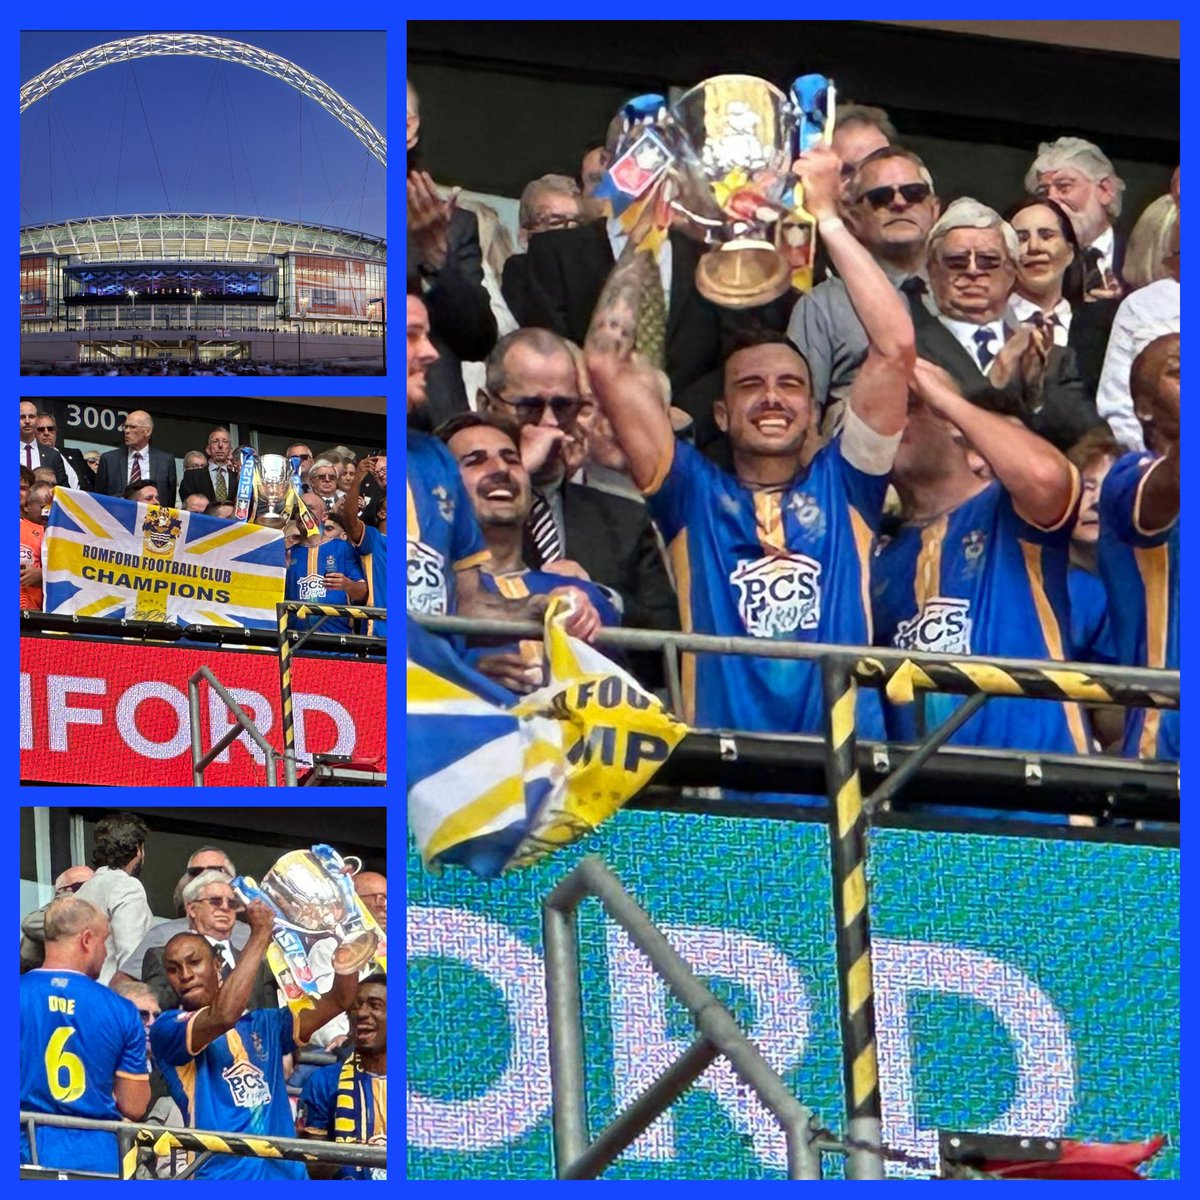 Huge congratulations to FA Vase Cup winners @RomfordFC at Wembley Stadium, proudly sporting our logo 🏟⚽️🎉 #Sponsorship #PCSLegal #Wembley